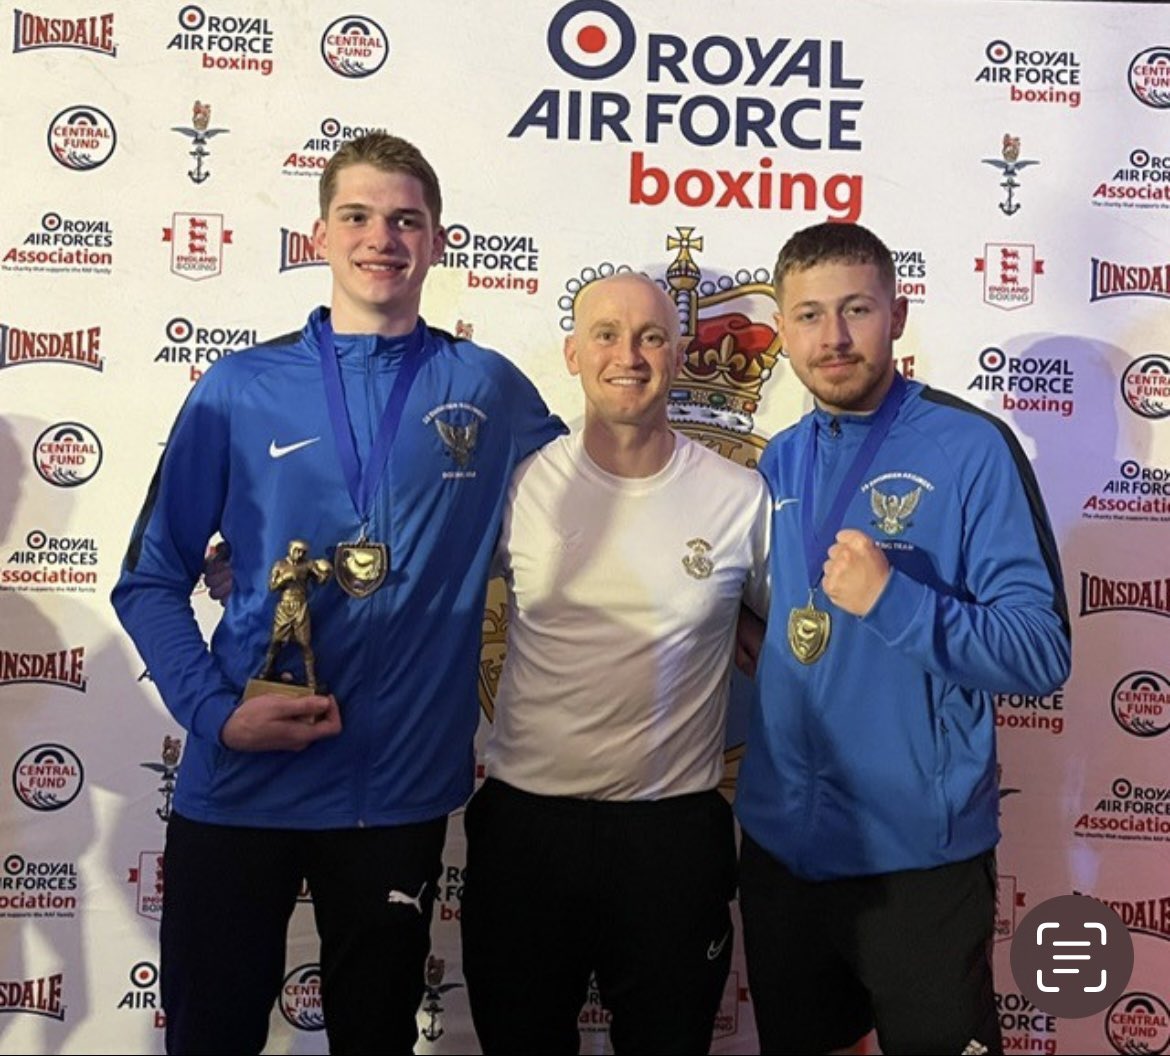 Spr Musleh, 48 Fd Sqn and Spr Curran, 60 Sqn represented 39 Engr Regt and the RE (Royal Engineer) Boxing Club at the RE Select v RAF Lossiemouth boxing evening. Both boxed very well earning hard fought victories against tuff RAF and civilian opponents. @Proud_Sappers